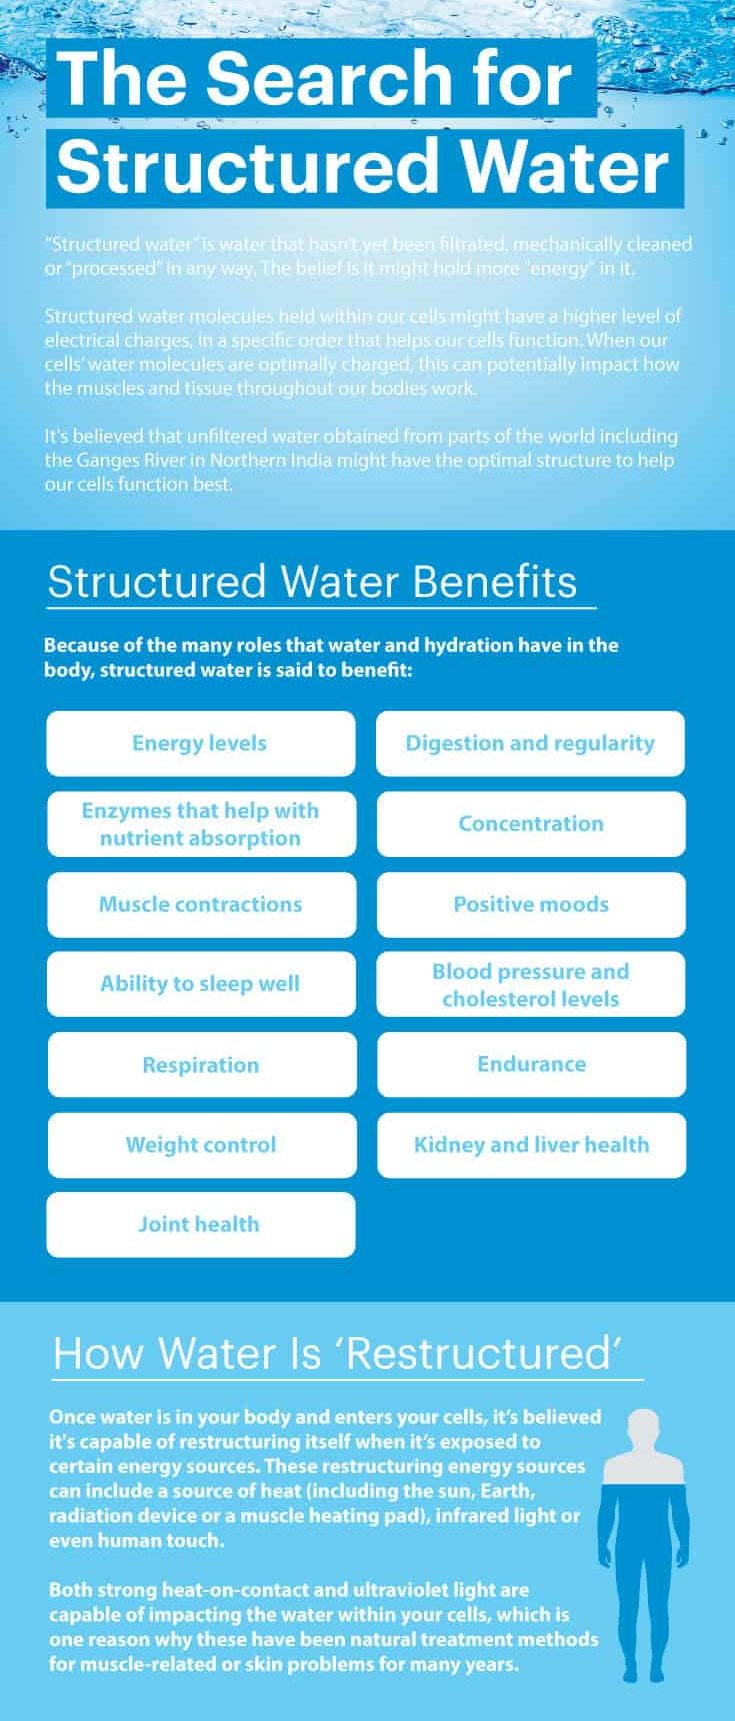 What is structured water?